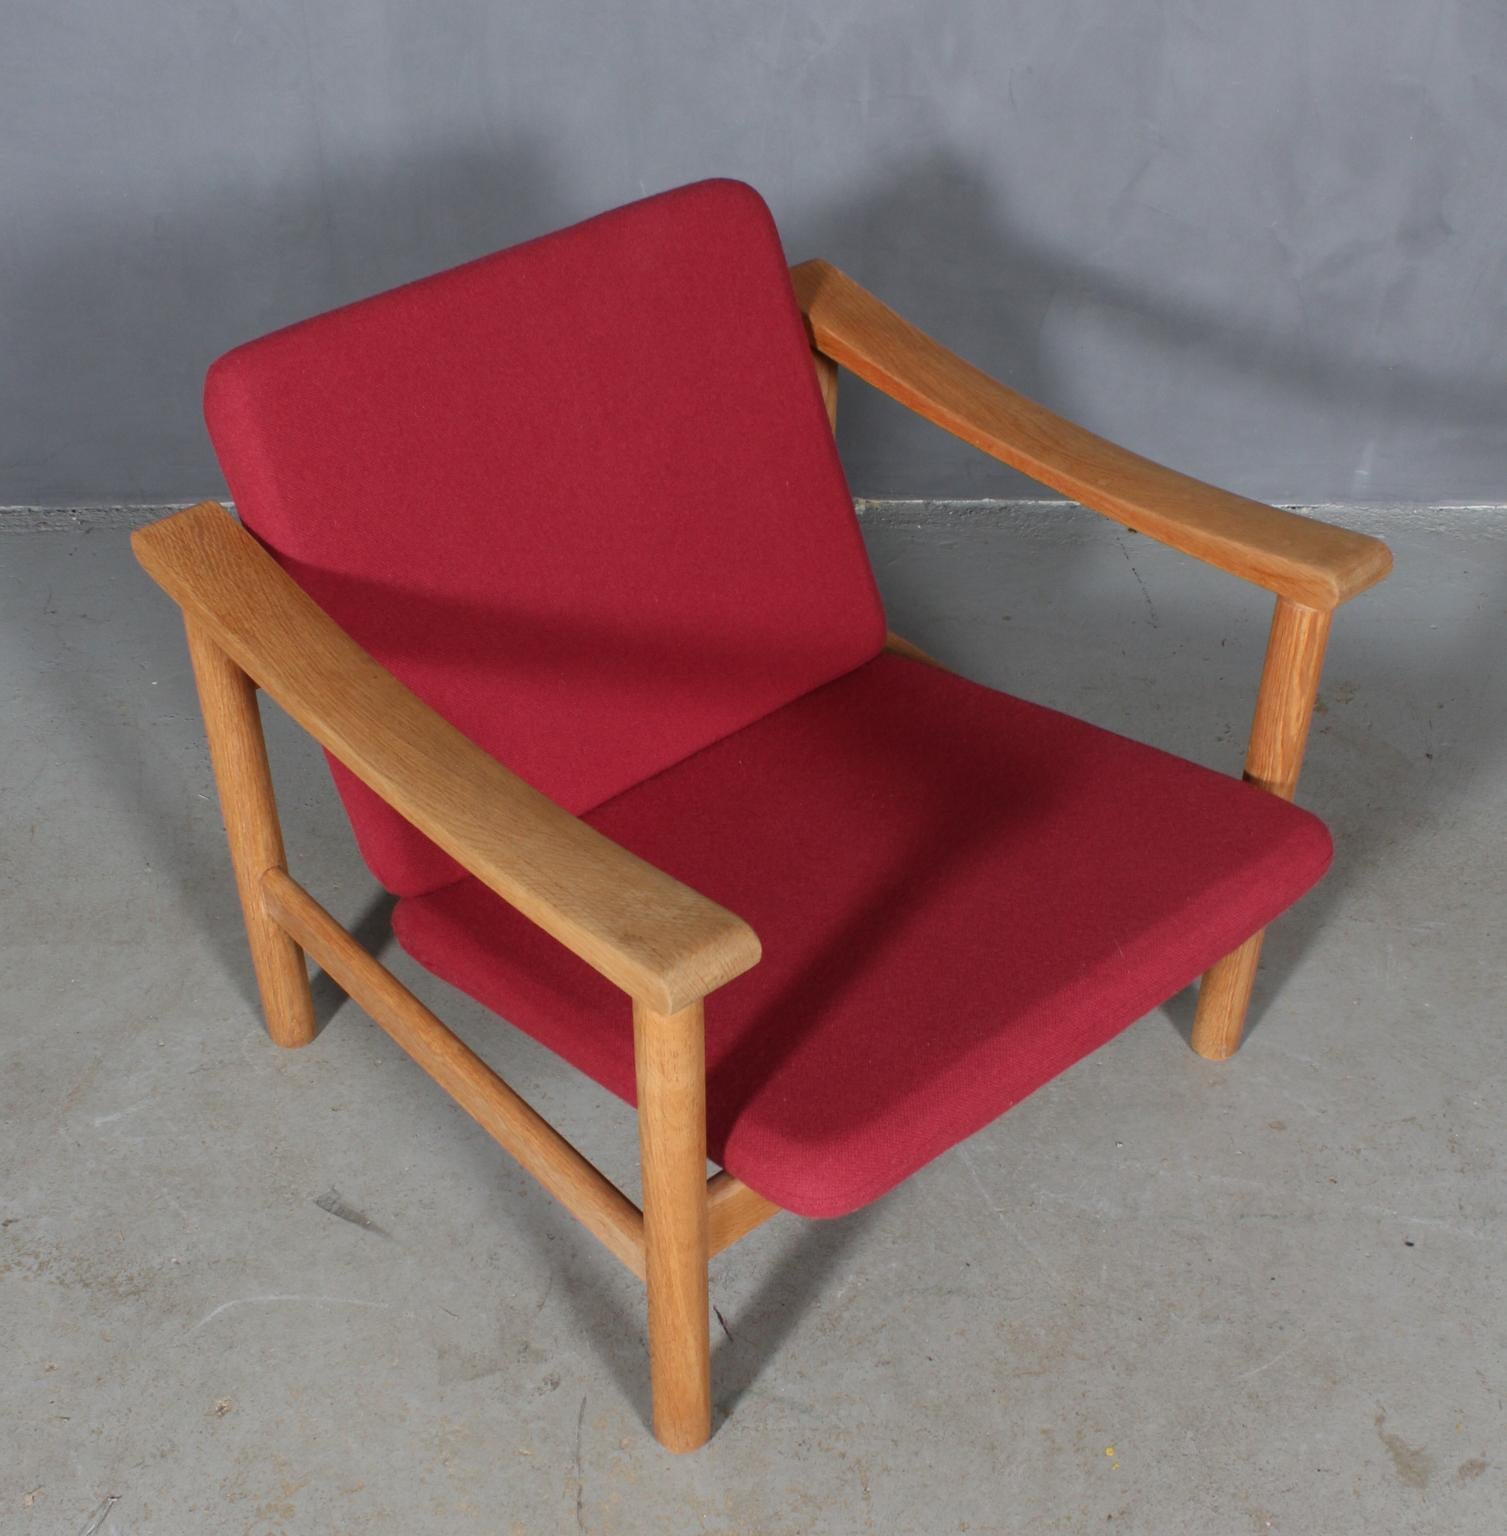 Hans J. Wegner lounge chair made of solid oak.

Original upholstered with red Kvadrat wool.

Made by GETAMA.

 